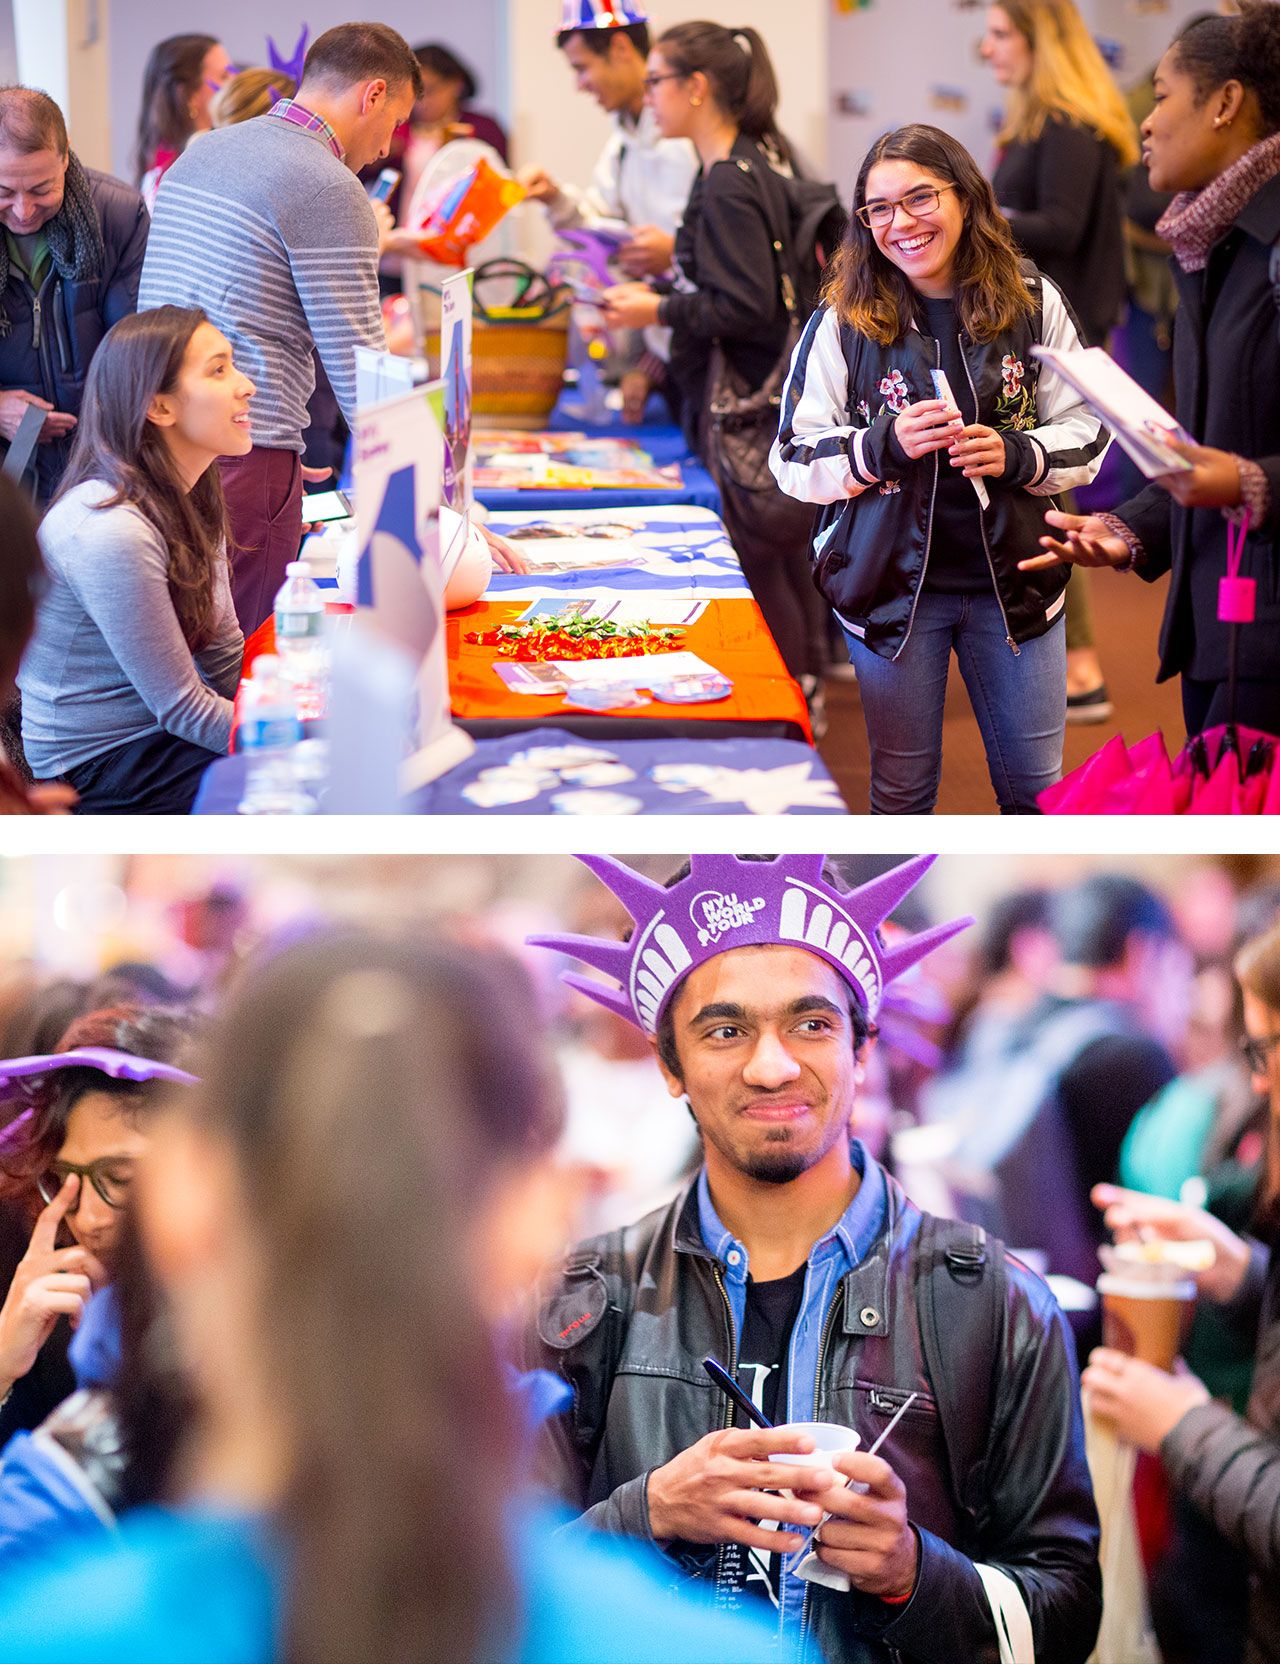 Image one: a student speaking with a vendor at World Tour. Image two: a student standing in a crowd, wearing a Statue of Liberty hat, and smiling.